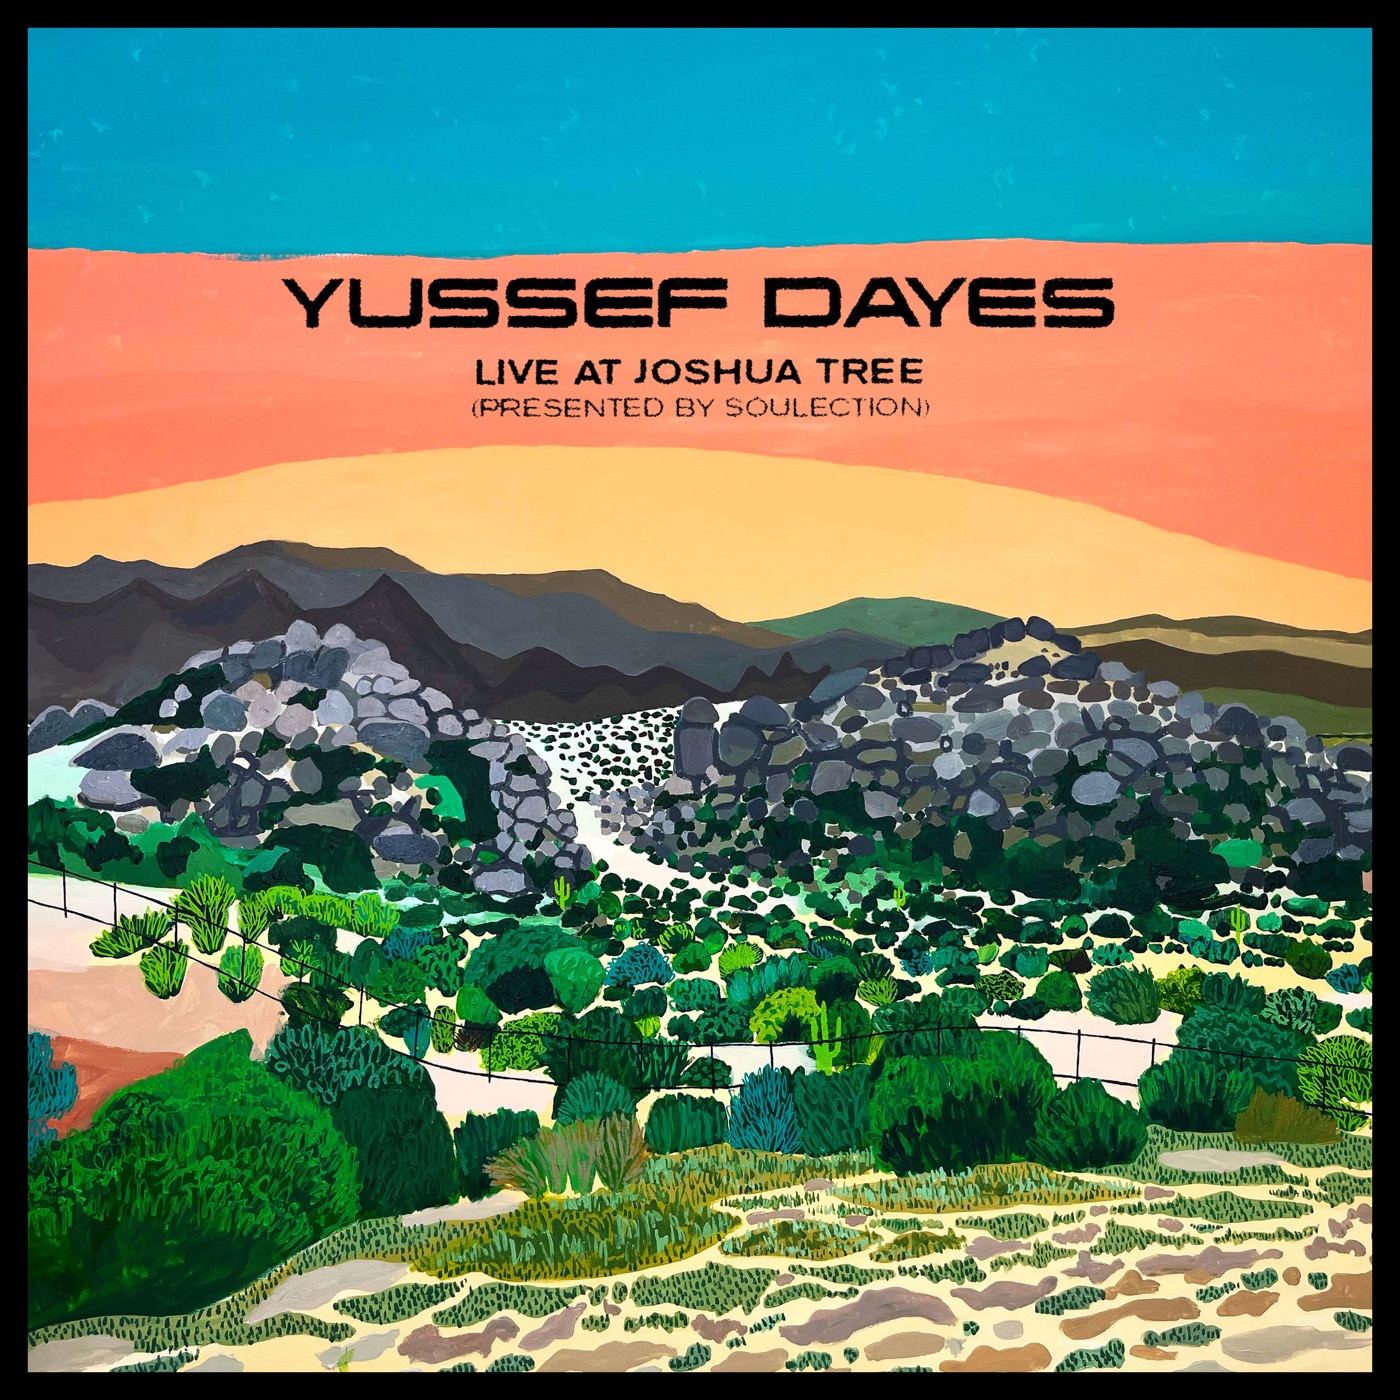 The Yussef Dayes Experience Live at Joshua Tree (Presented by Soulection) by Yussef Dayes